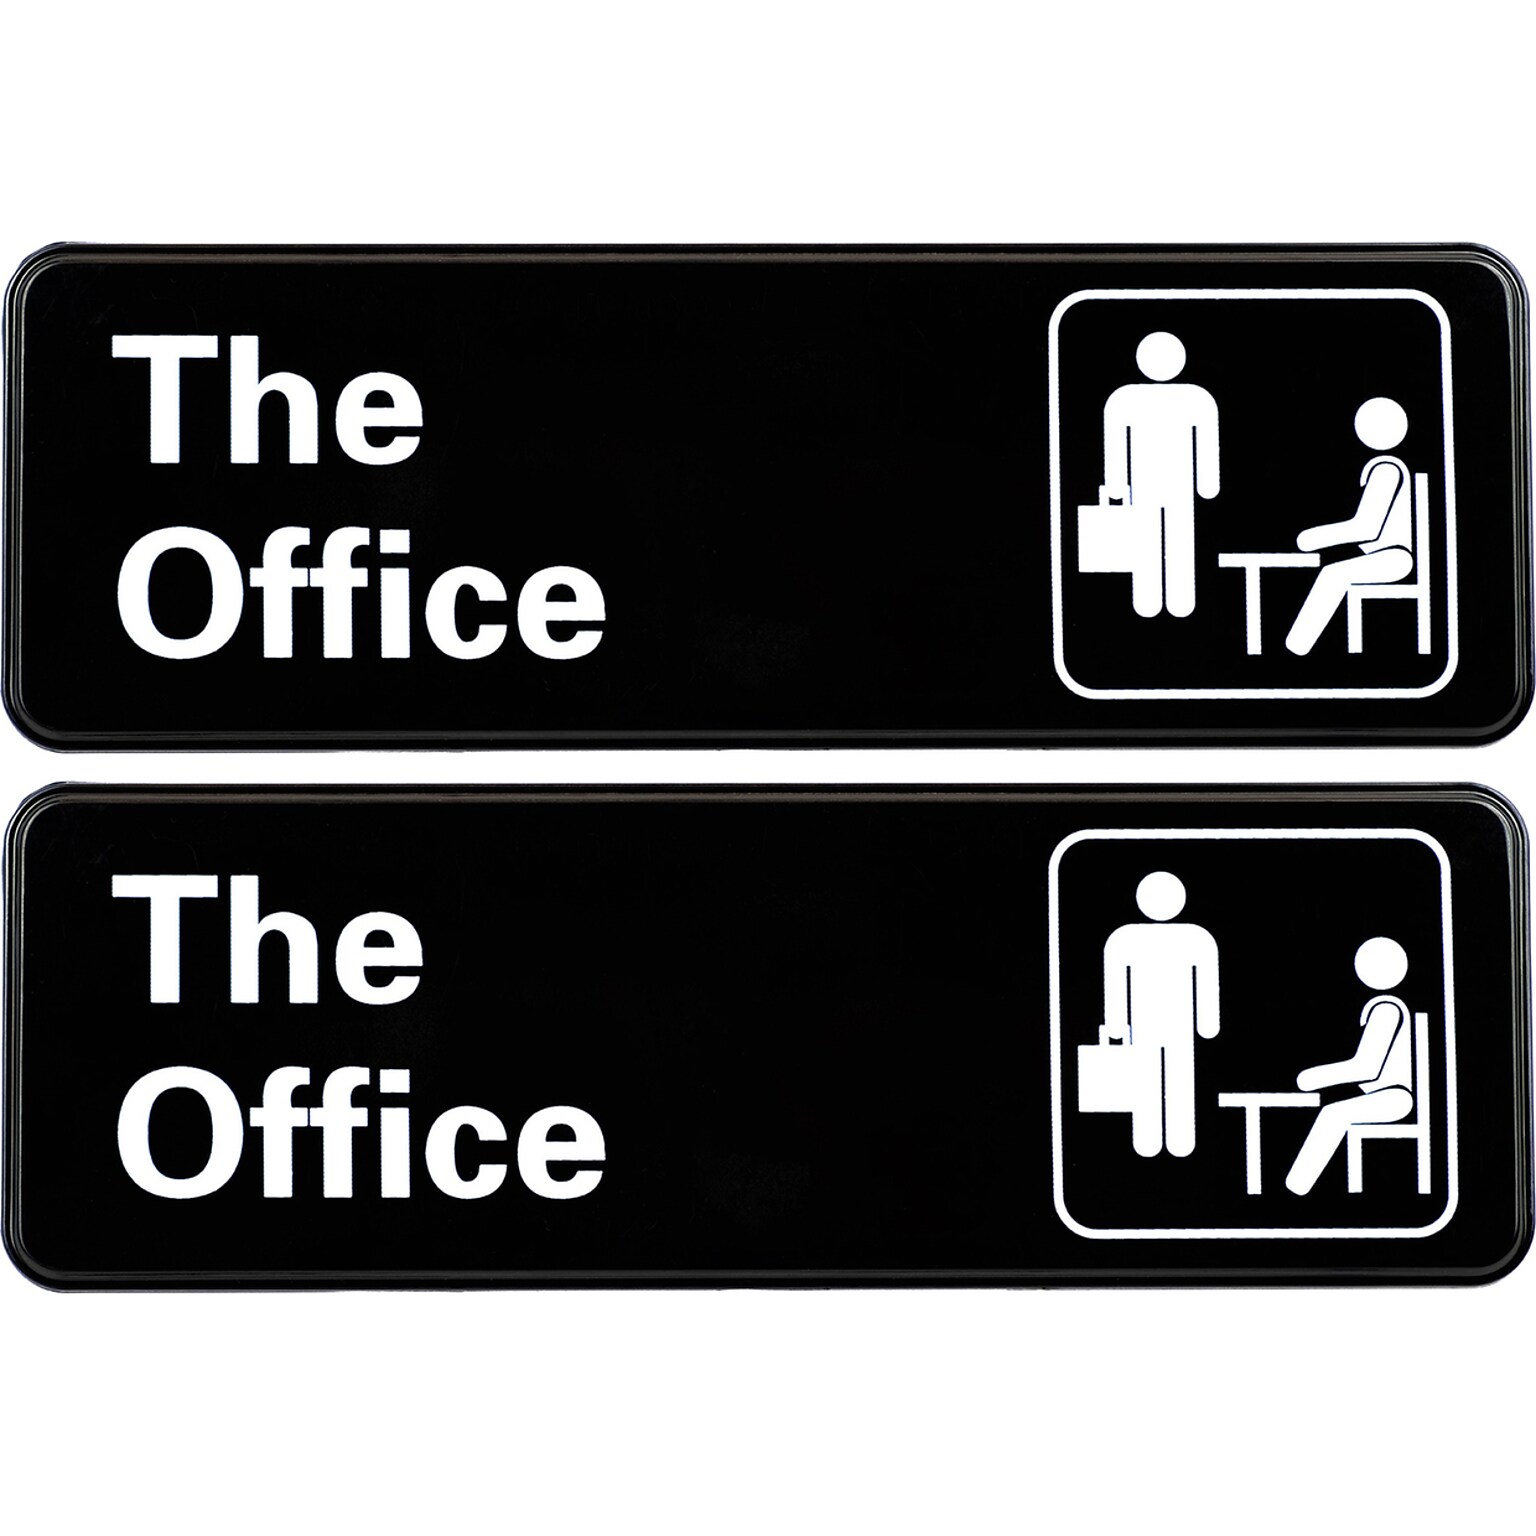 Excello Global Products The Office Indoor/Outdoor Wall Sign, 9 x 3, Black/White, 2/Pack (EGP-HD-0064-S)